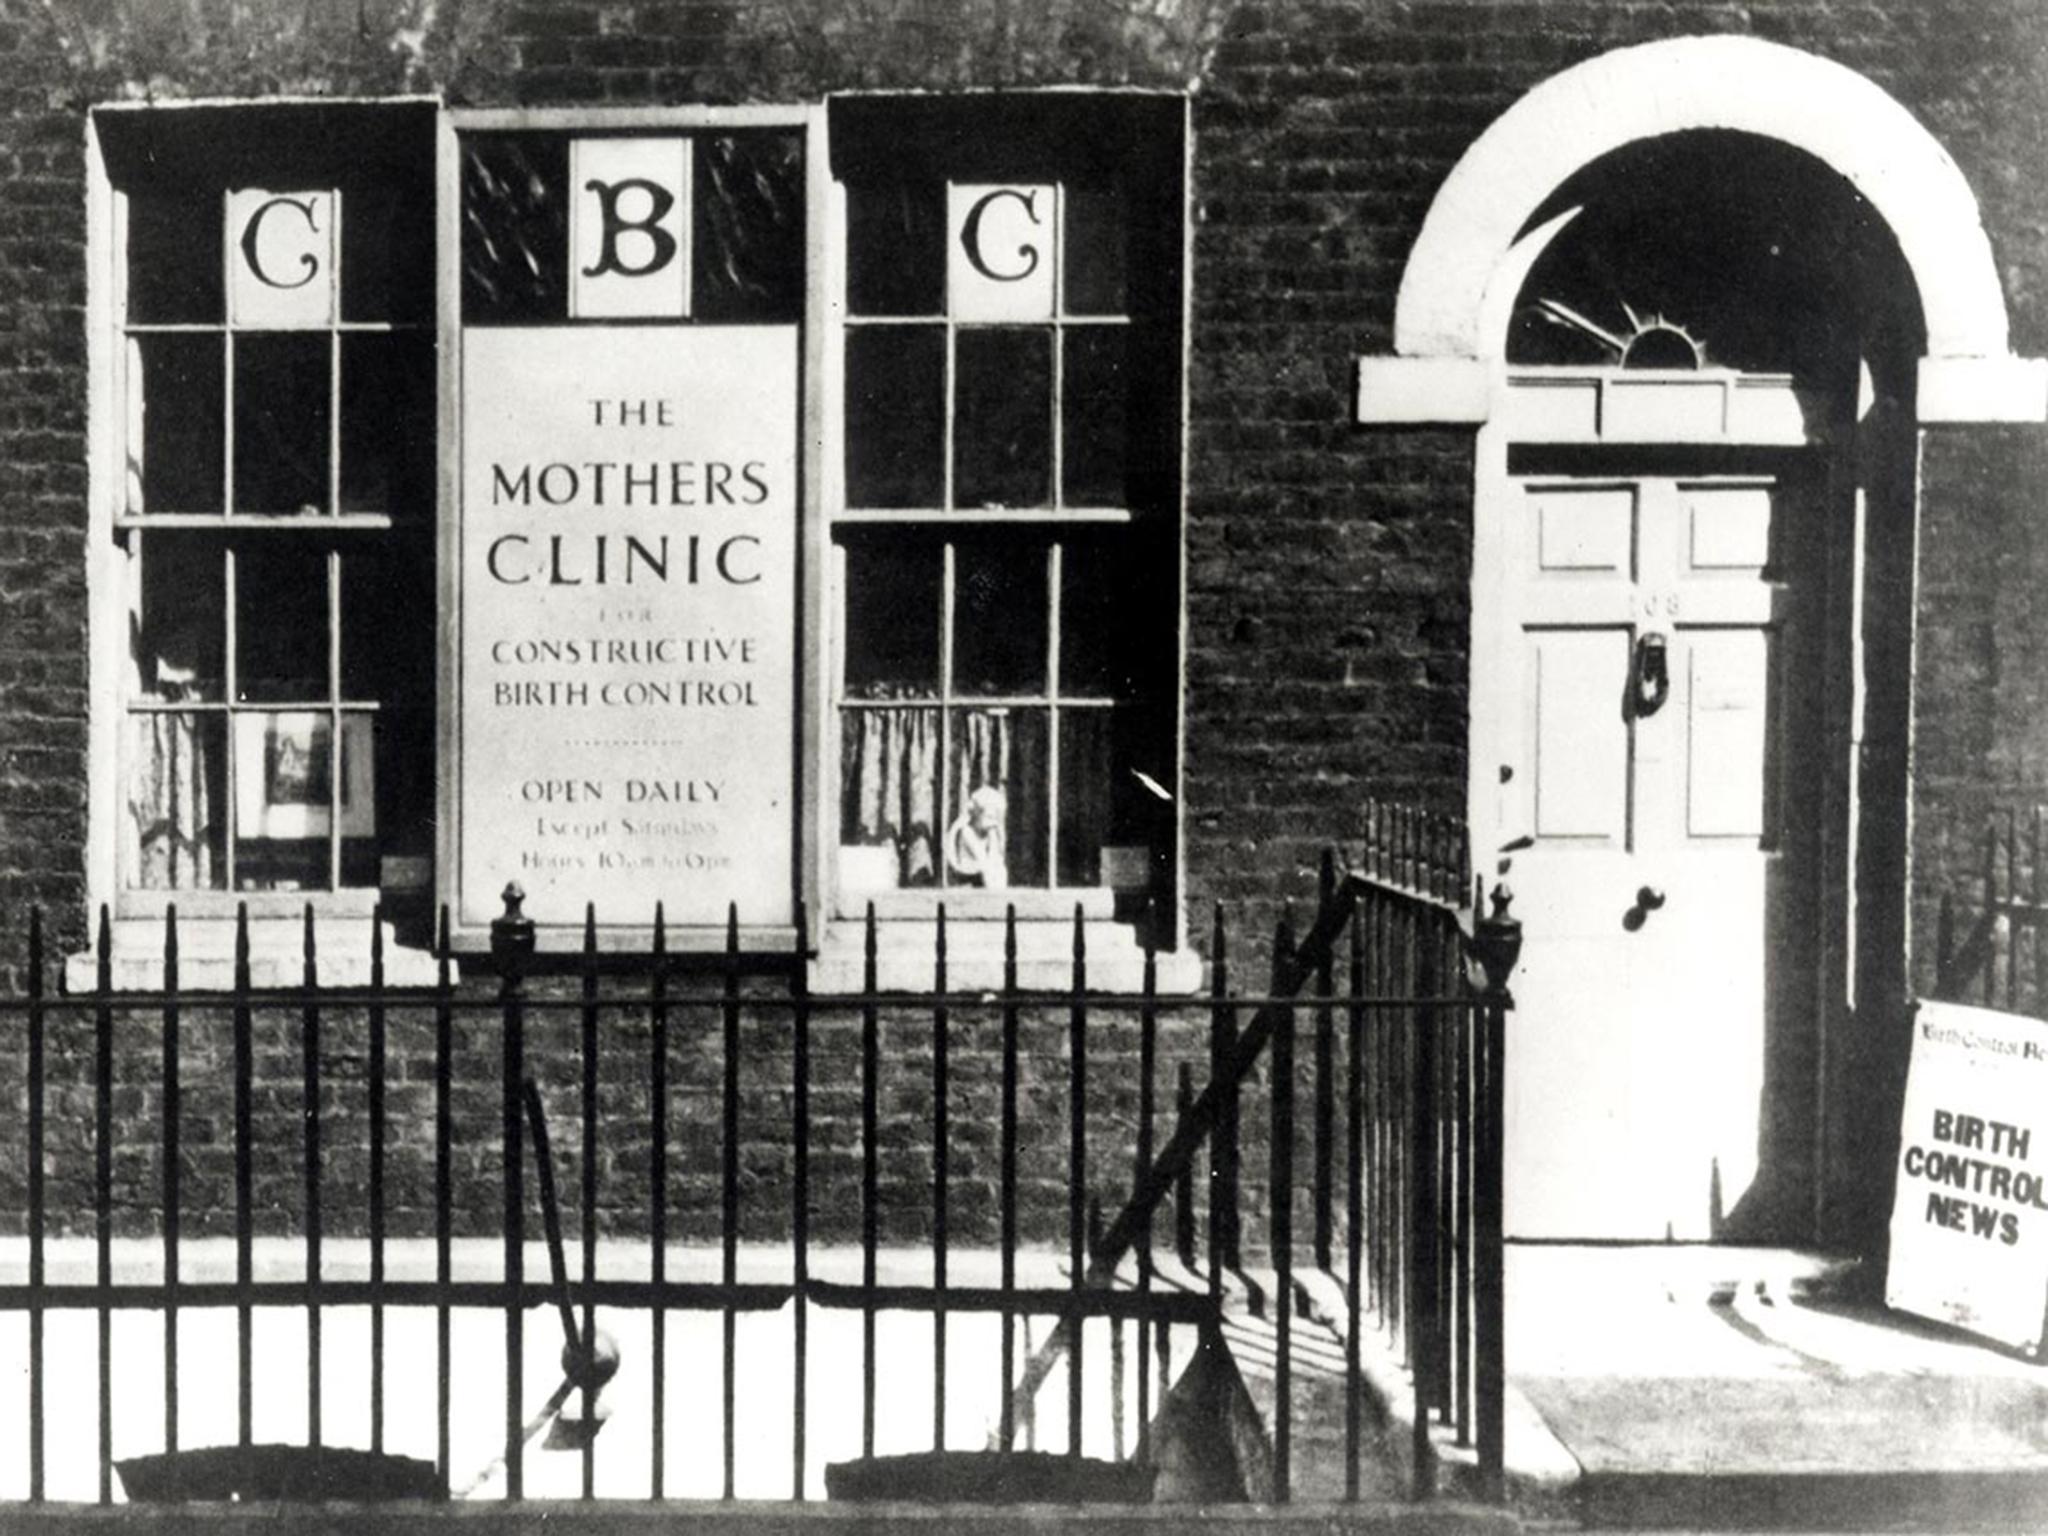 &#13;
The first family-planning clinic moved from Holloway to Marie Stopes House in Fitzrovia (Marie Stopes International)&#13;